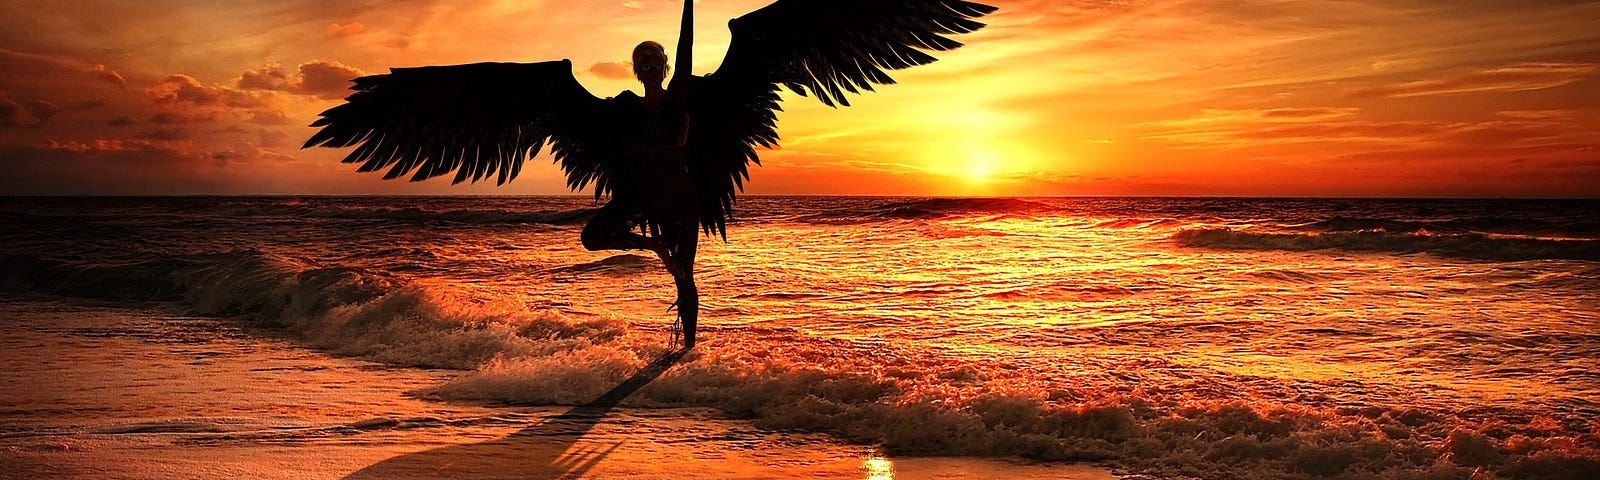 A silhouette of a winged figure standing on one foot in the ocean surf with the sunset behind.